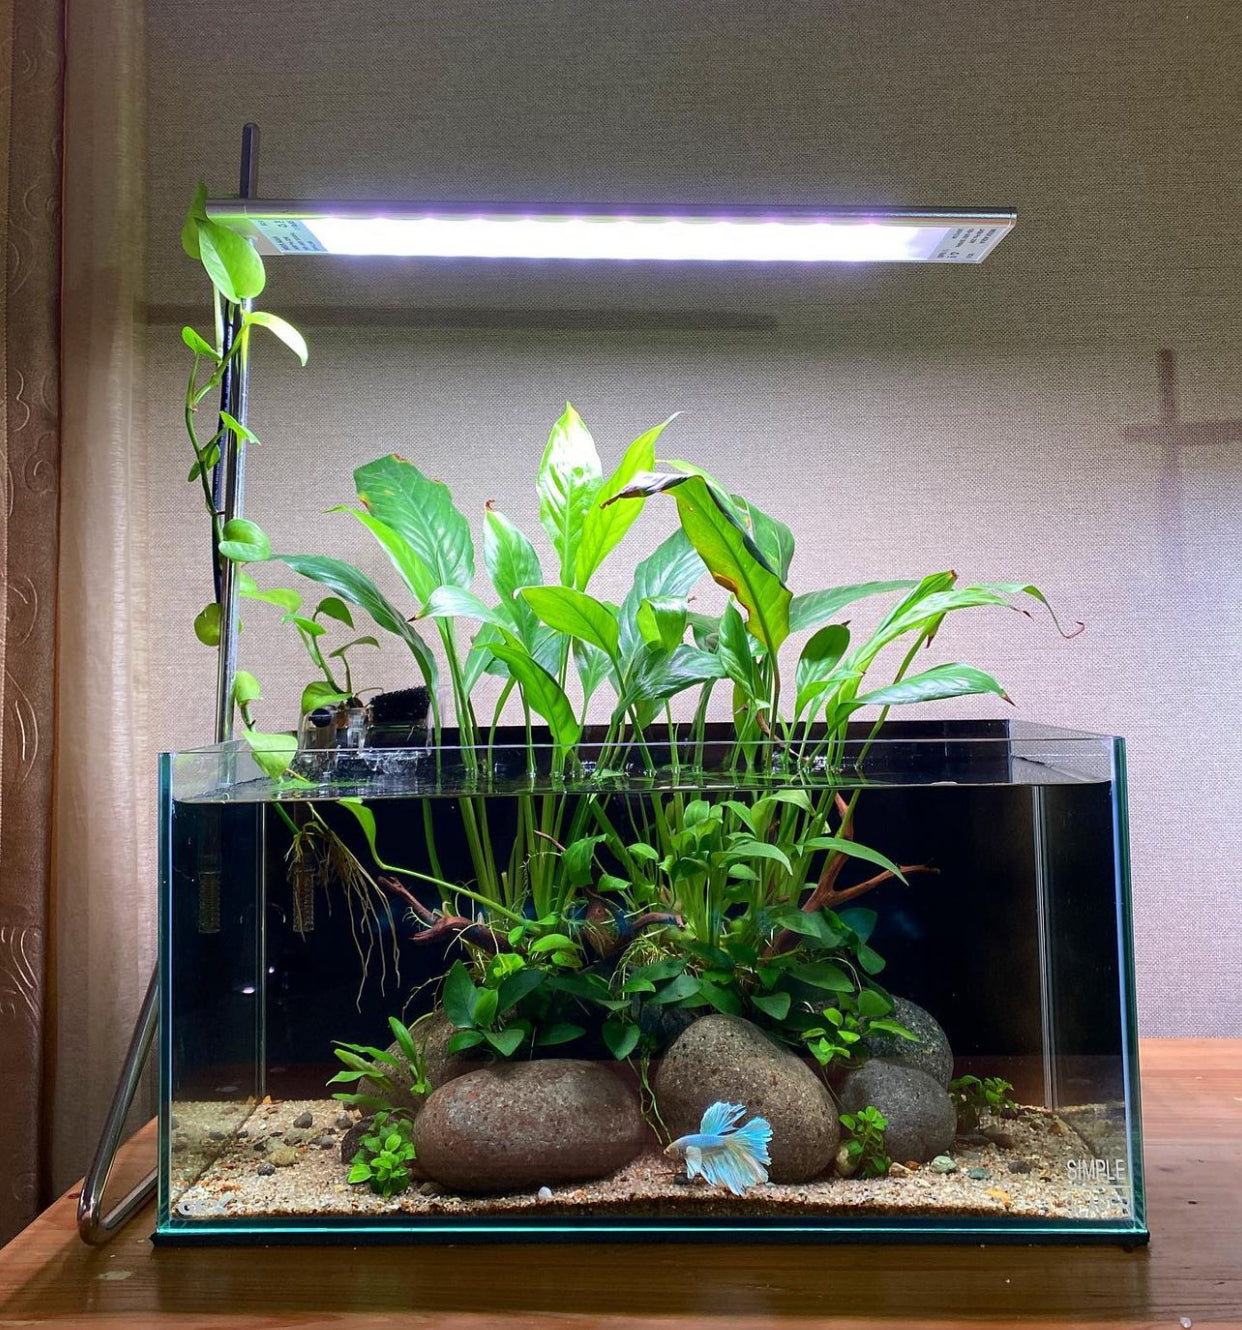 Betta fish tanks aquascapes with betta fish included (only Melbourne)*